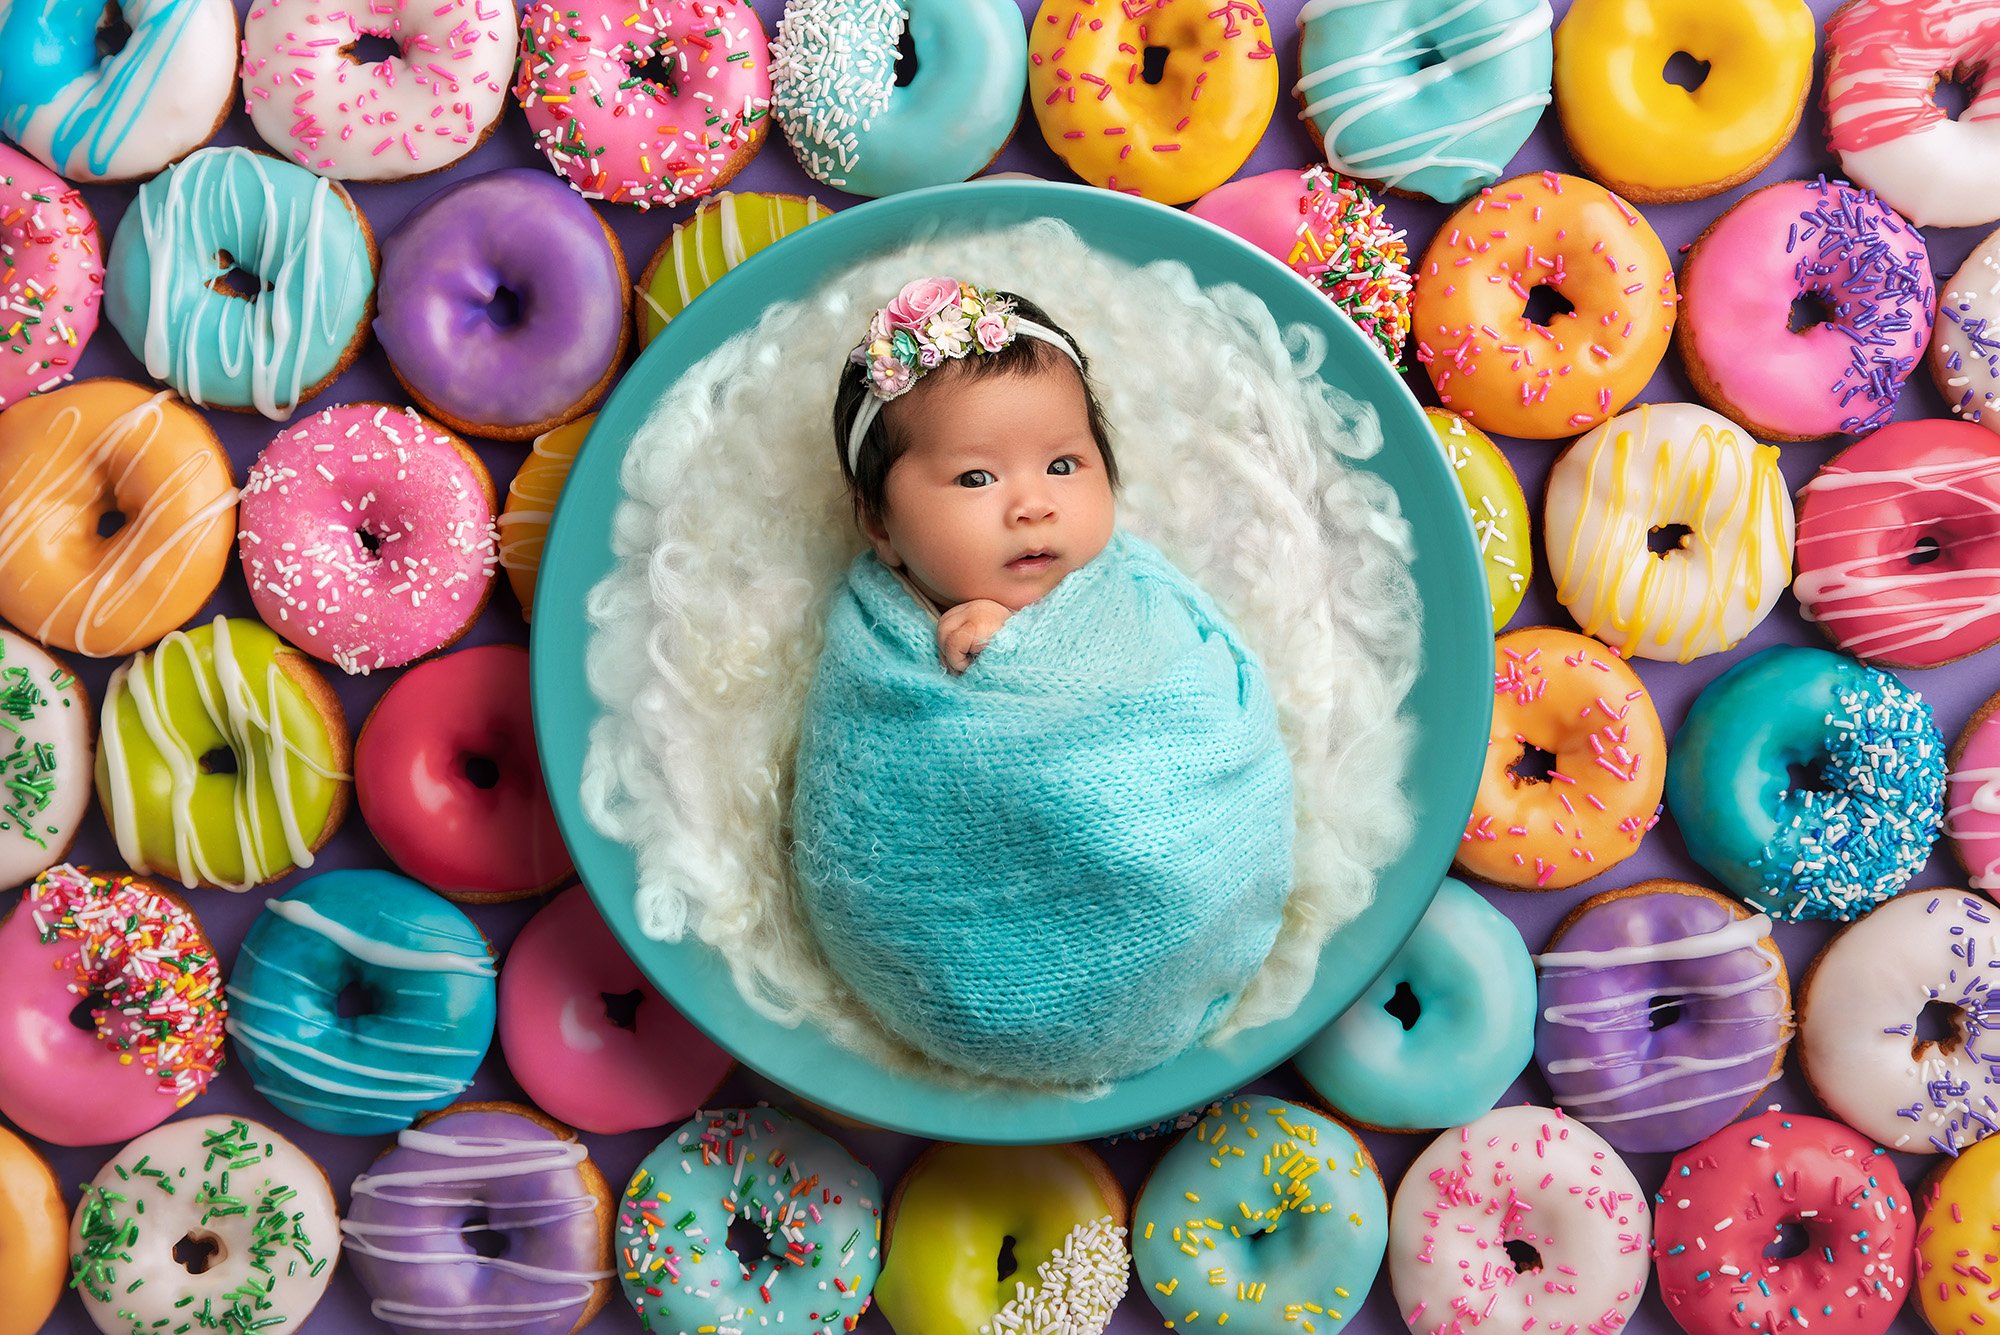 vibrant newborn photo awake newborn baby girl swaddled in an aqua sweater wrap laying in aqua bowl with fuzzy white blanket on a donut background